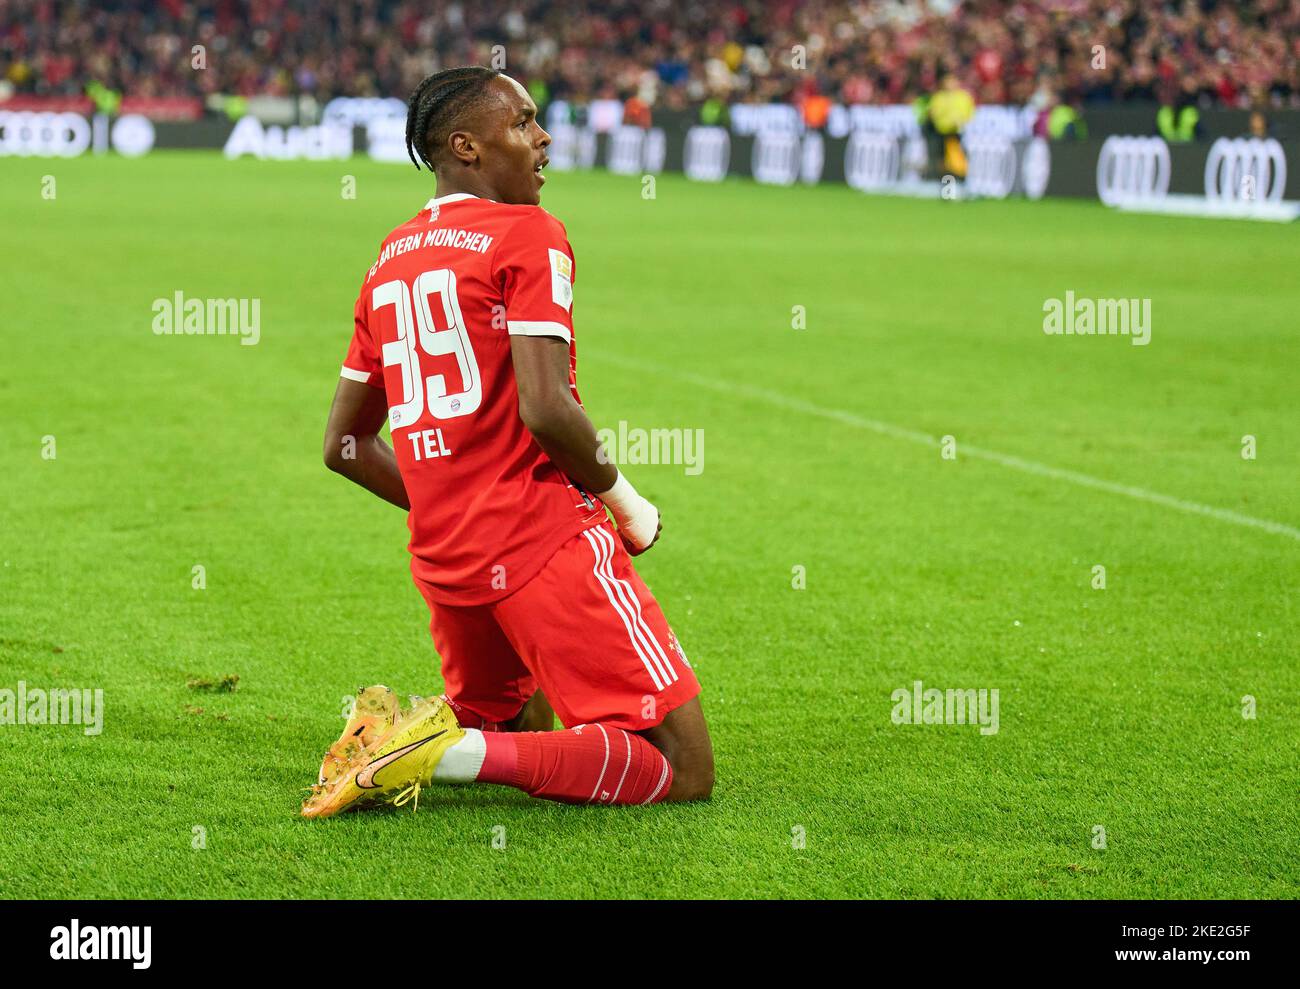 Mathys Tel, FCB 39  celebrates his goal, happy, laugh, celebration, 5-1 in the match FC BAYERN MÜNCHEN - SV WERDER BREMEN 6-1 1.German Football League on Nov 8, 2022 in Munich, Germany. Season 2022/2023, matchday 14, 1.Bundesliga, FCB, München, 14.Spieltag © Peter Schatz / Alamy Live News    - DFL REGULATIONS PROHIBIT ANY USE OF PHOTOGRAPHS as IMAGE SEQUENCES and/or QUASI-VIDEO - Stock Photo